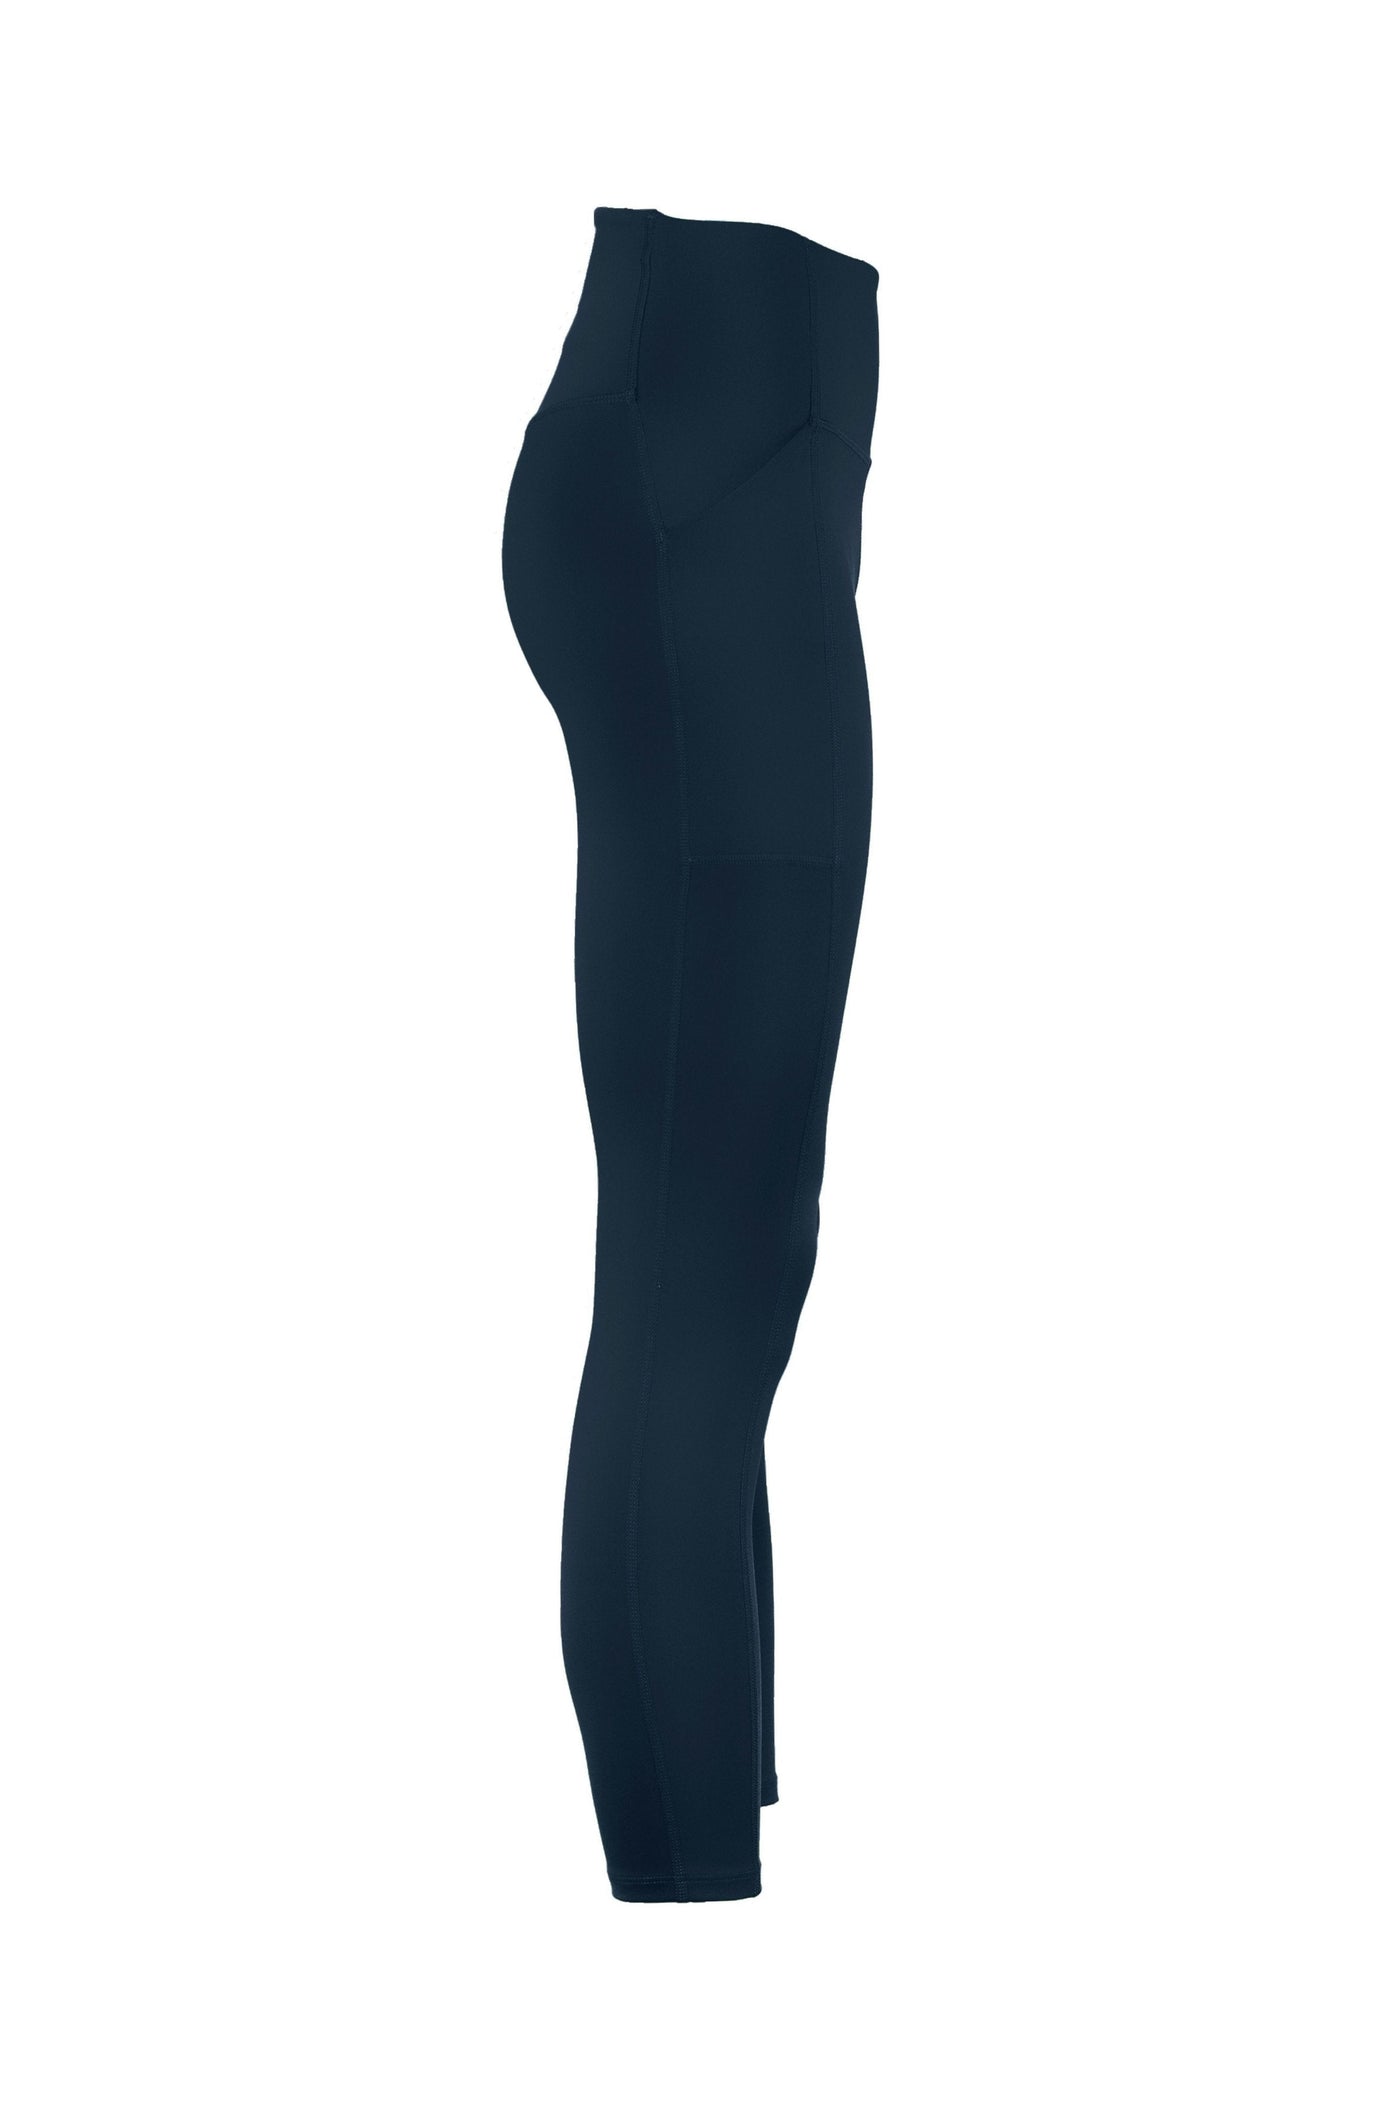 Girlfriend Collective Midnight Pocket Leggings High Rise, 7/8 – Ohh! By Gum